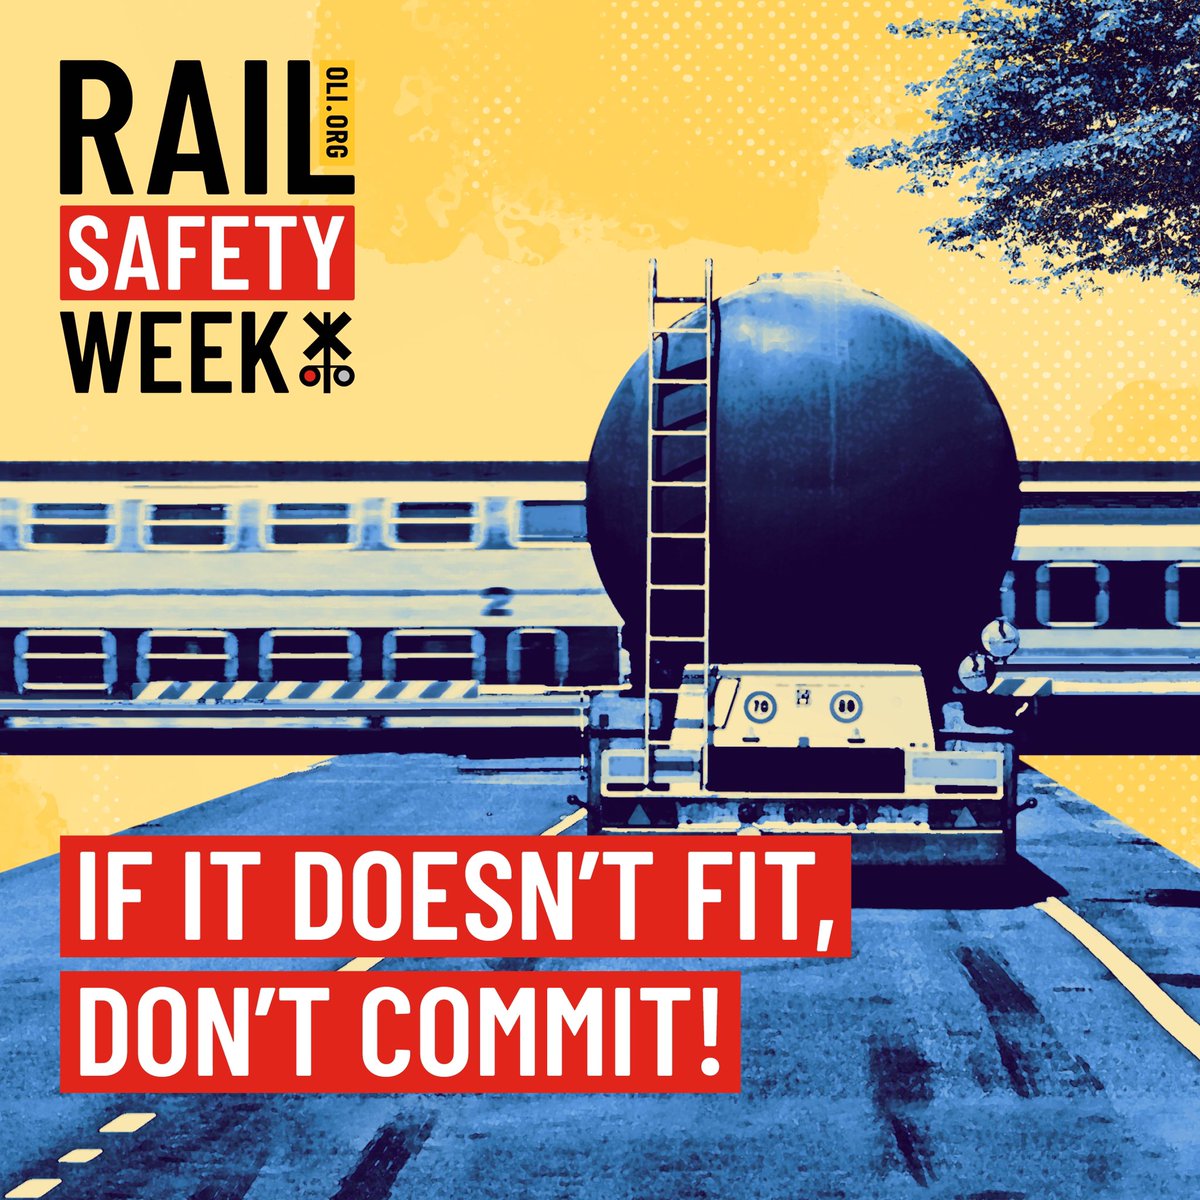 Professional Drivers, if it doesn't fit, don't commit! Know how to spot low ground clearances at railroad crossings. Always look for the signs. Always expect a train.

#RailSafetyWeek #STOPTrackTragedies